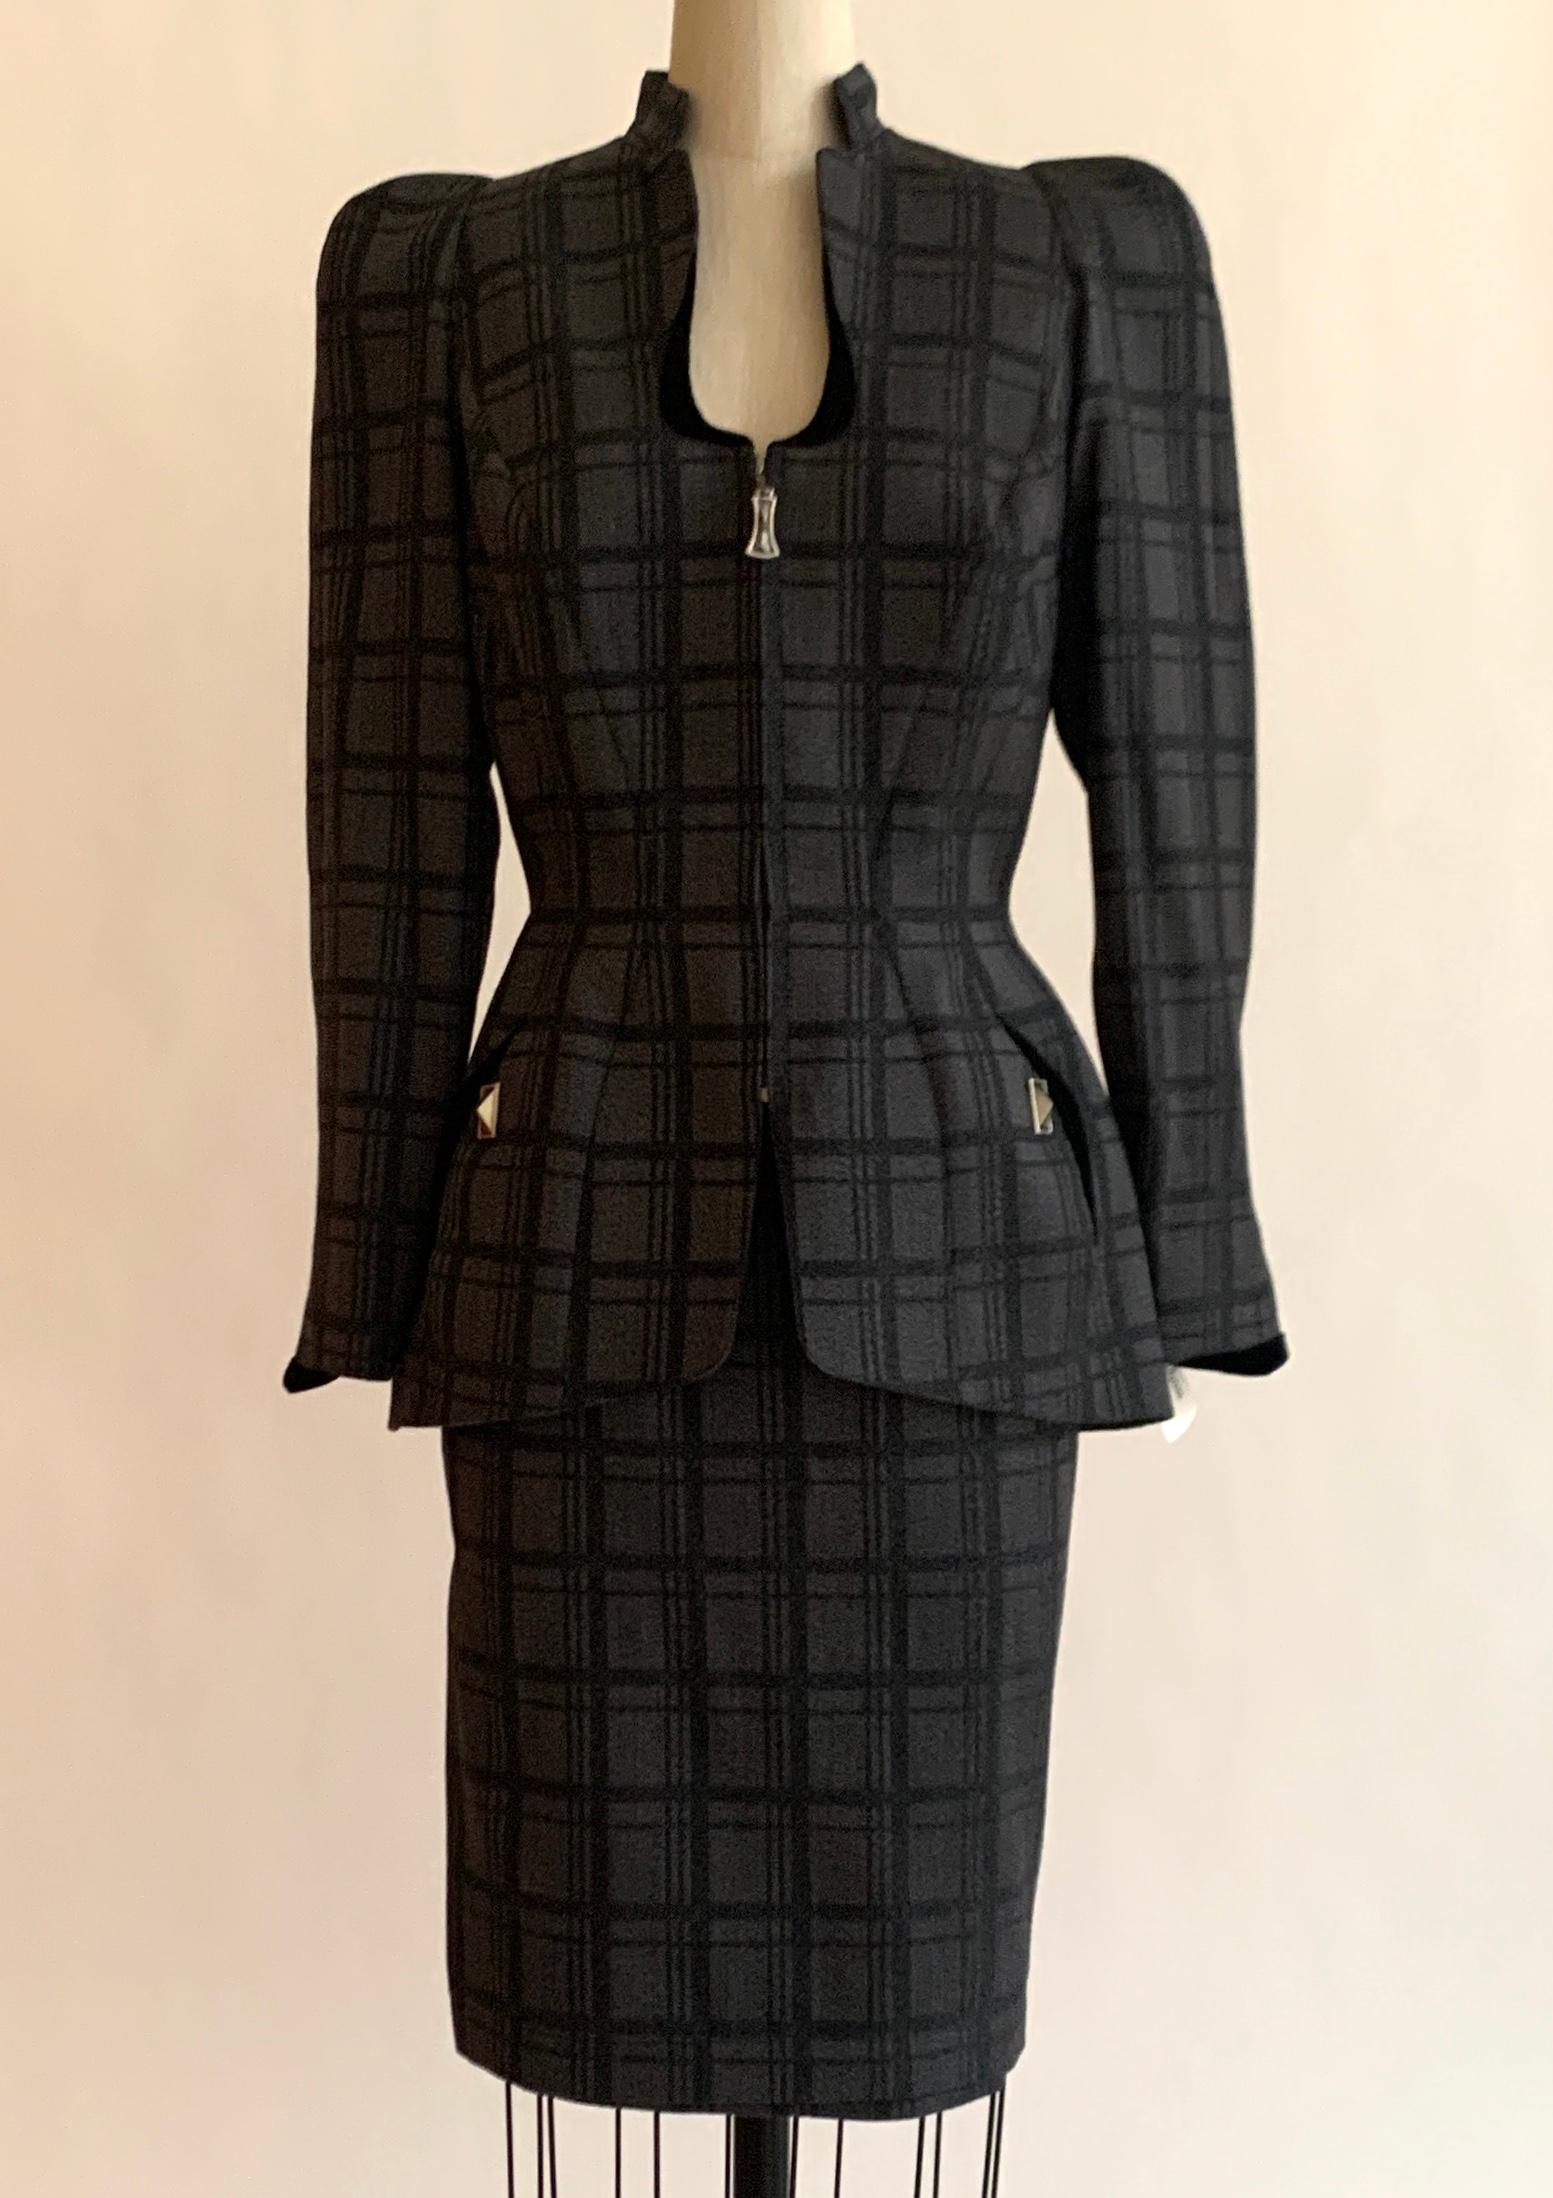 Thierry Mugler vintage deadstock 1980s charcoal gray and black plaid skirt suit with black velvet trim. Jacket has zip front with very tailored line and strong puffed shoulder with mid-weight padding, total Blade Runner style! Pencil skirt fastens